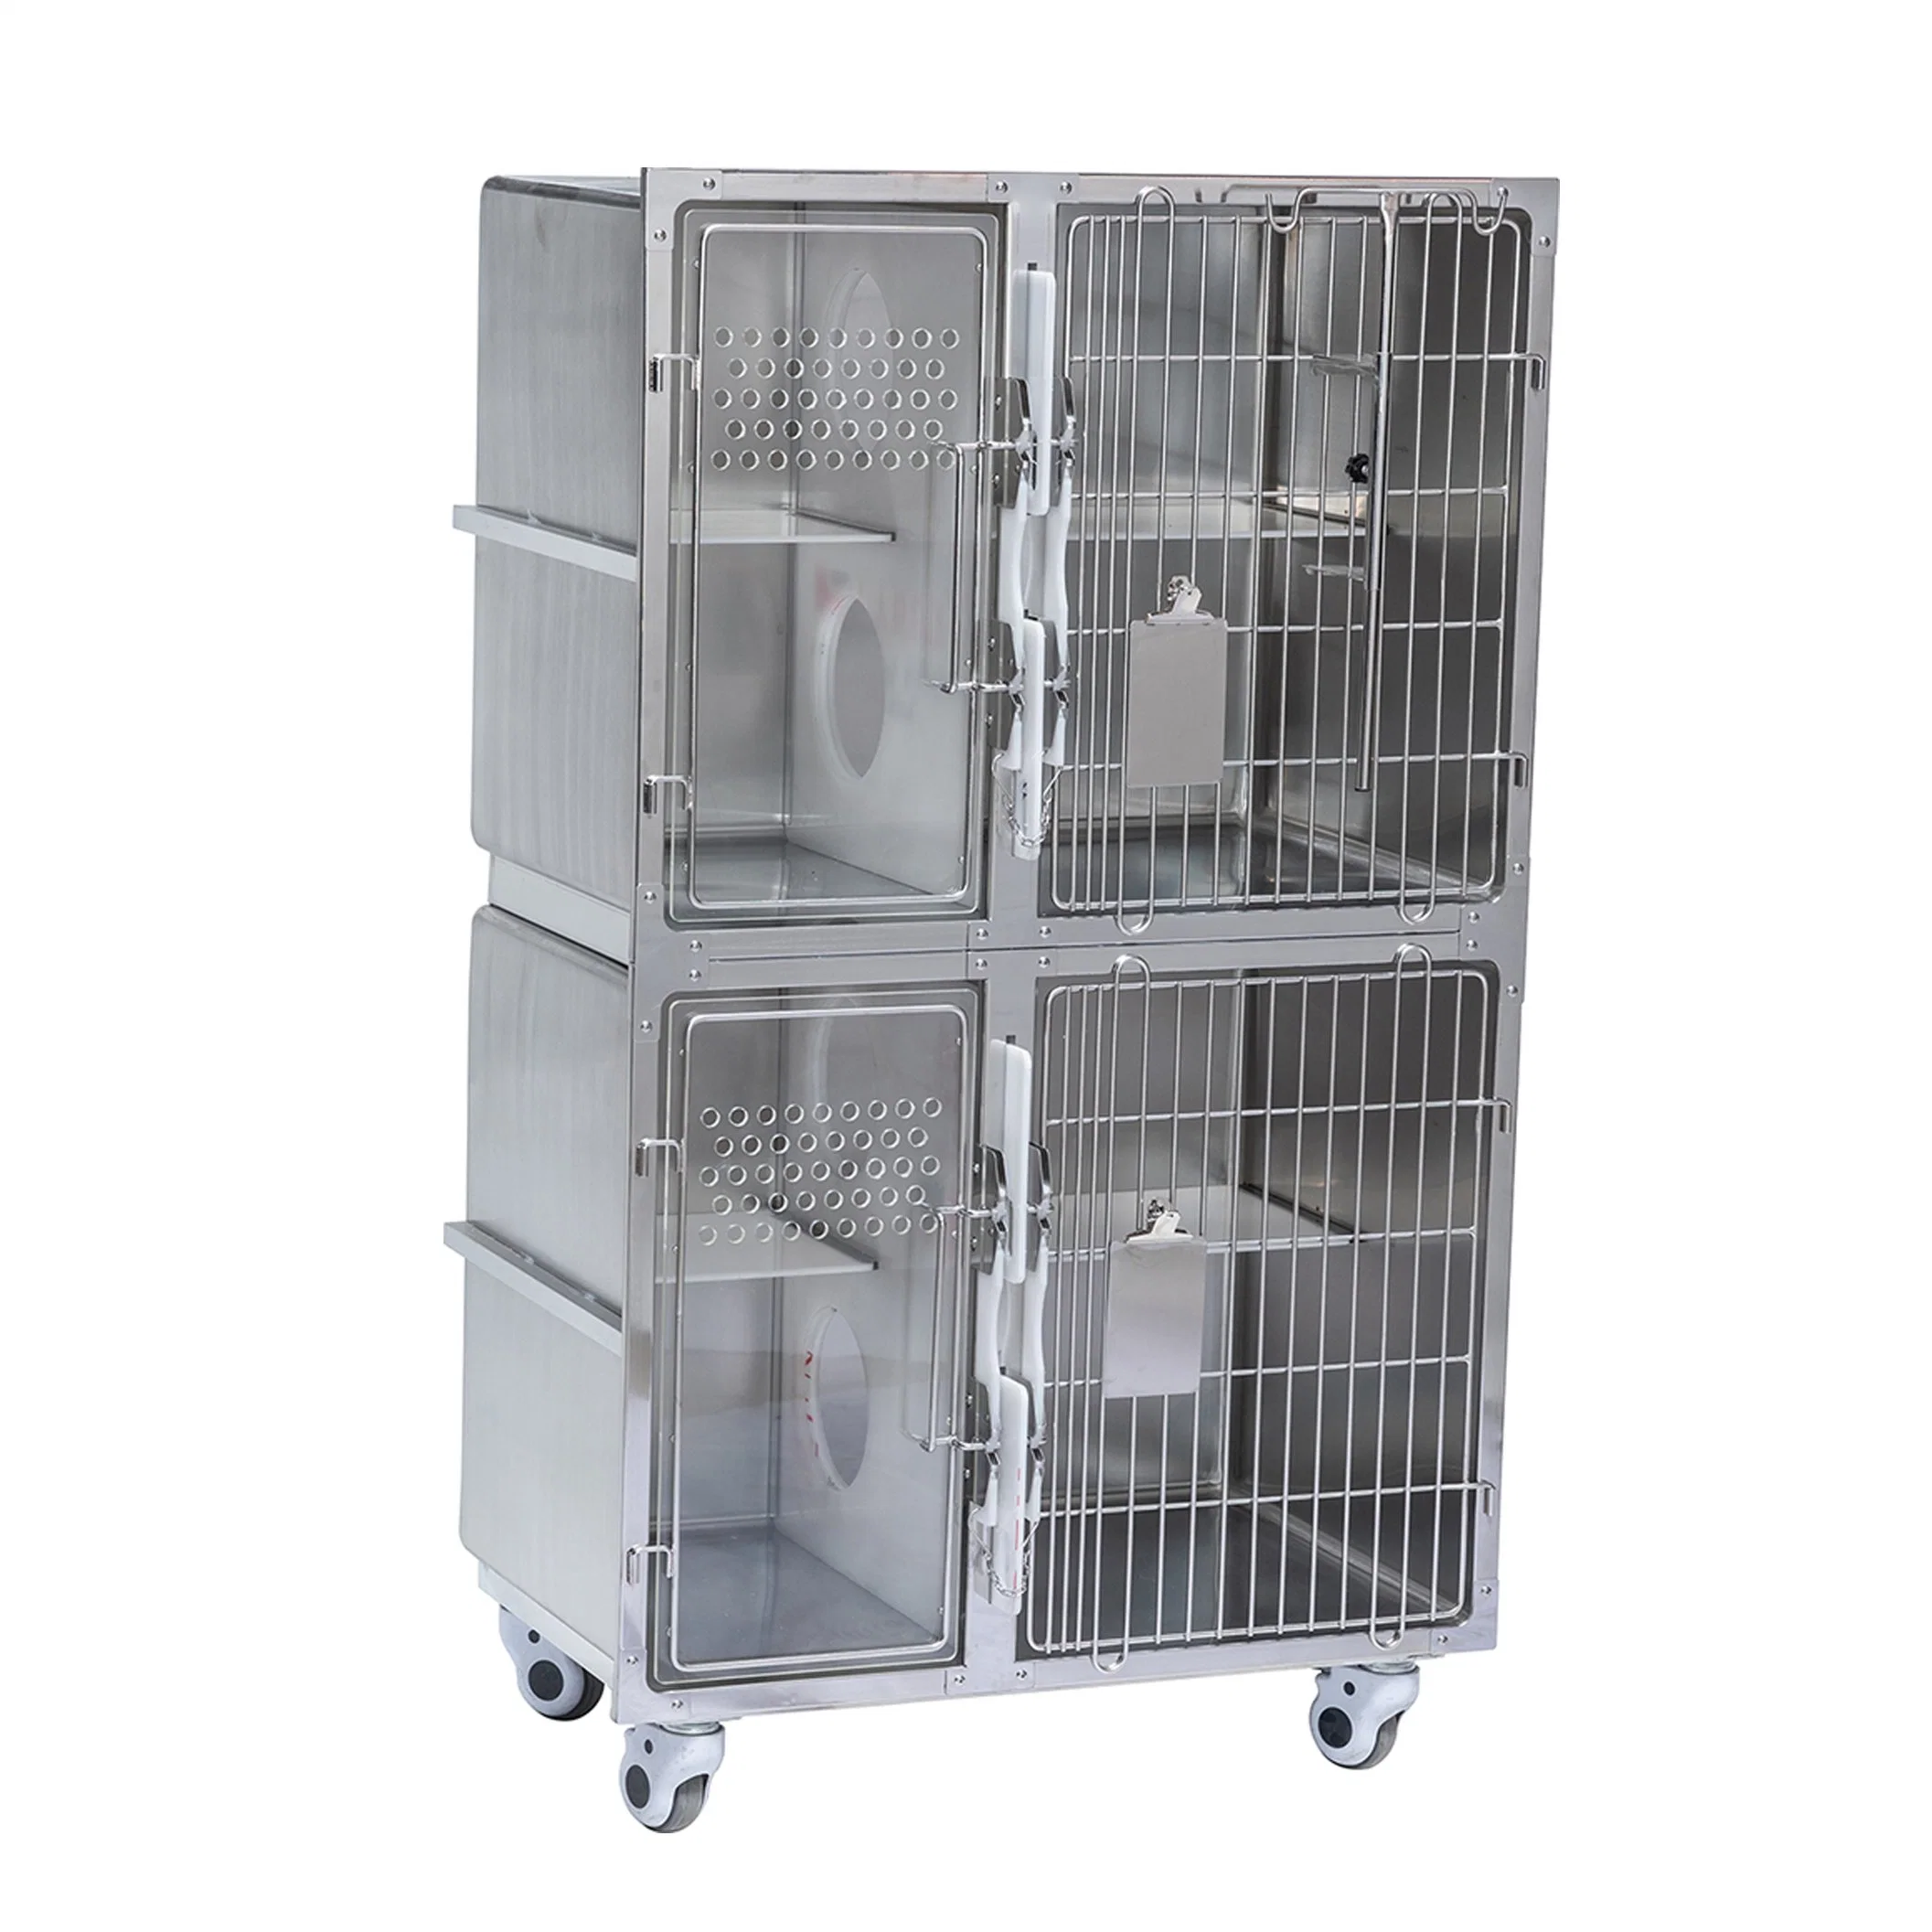 in-V006 Hot Sales Veterinary Cage Pet Cages Dog Carriers Houses Animal 4 Doors Cat Cage